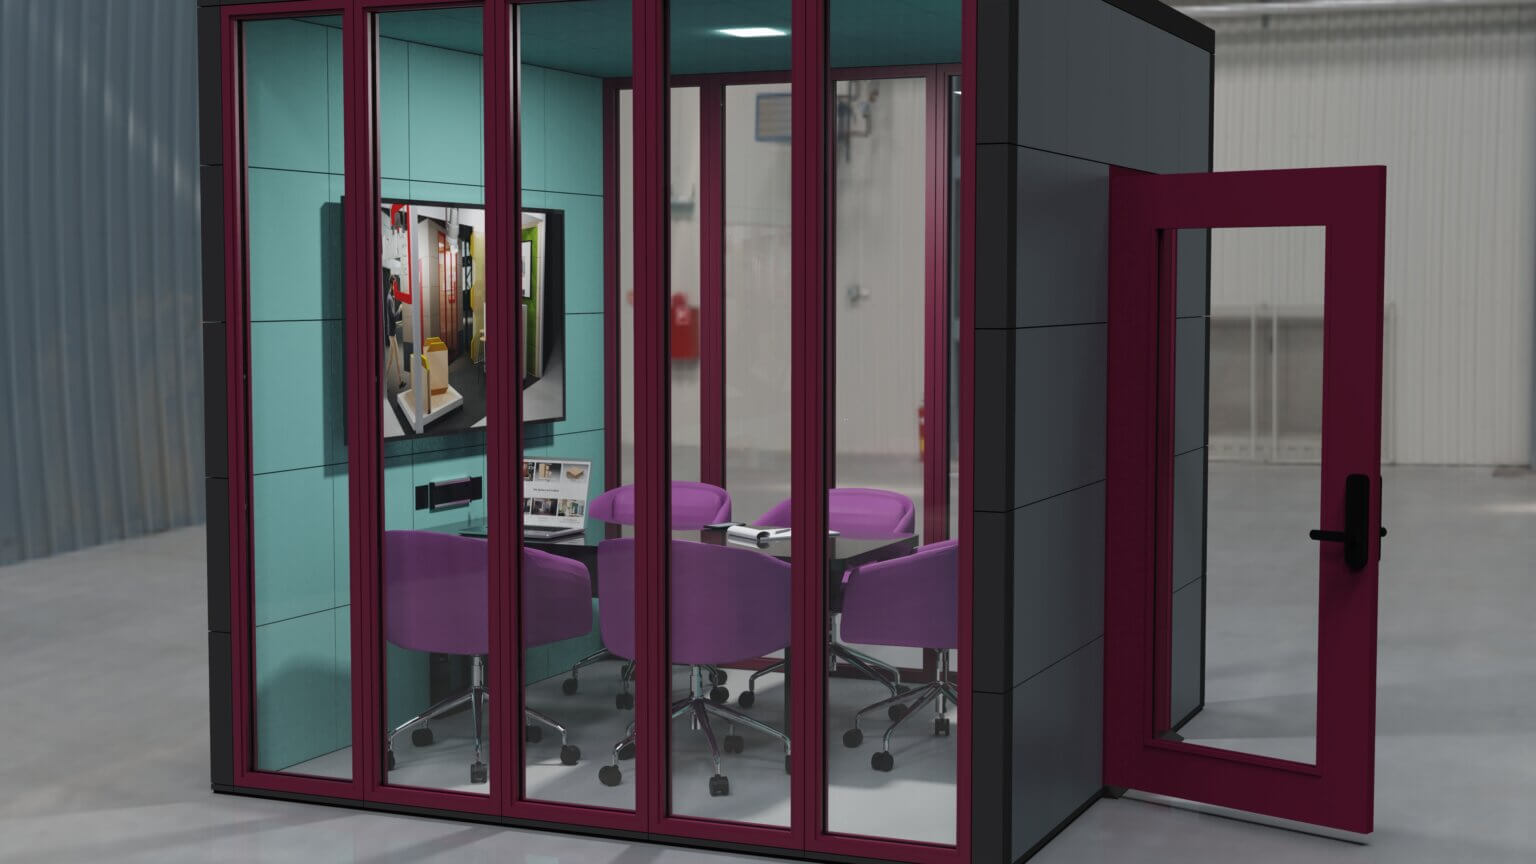 Integrating modular pod meeting booths into offices